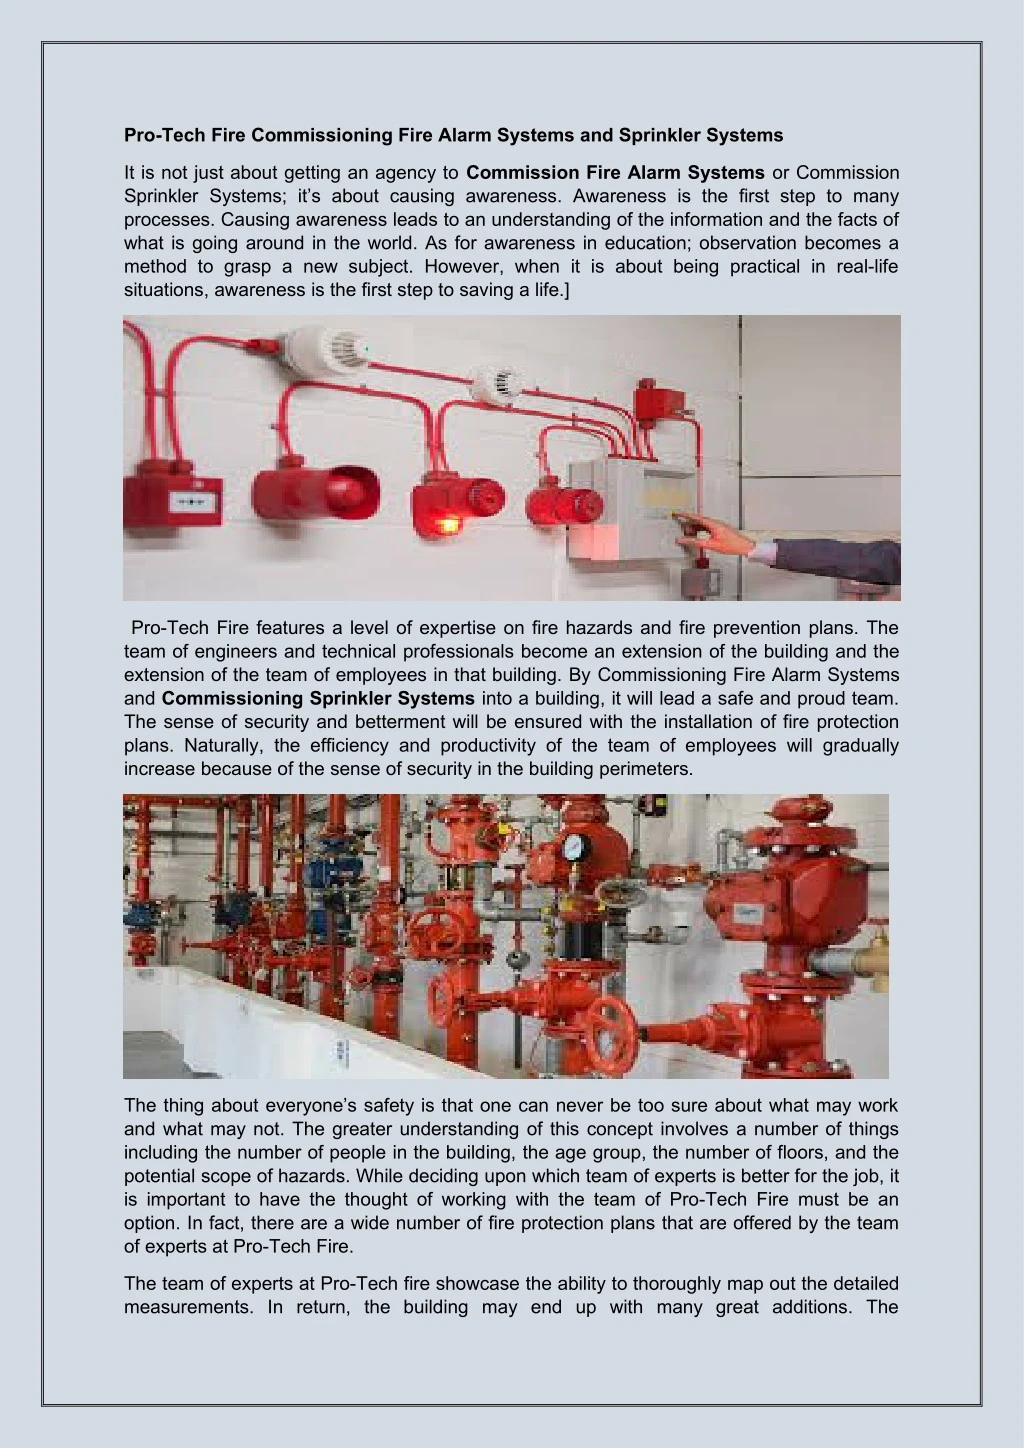 pro tech fire commissioning fire alarm systems